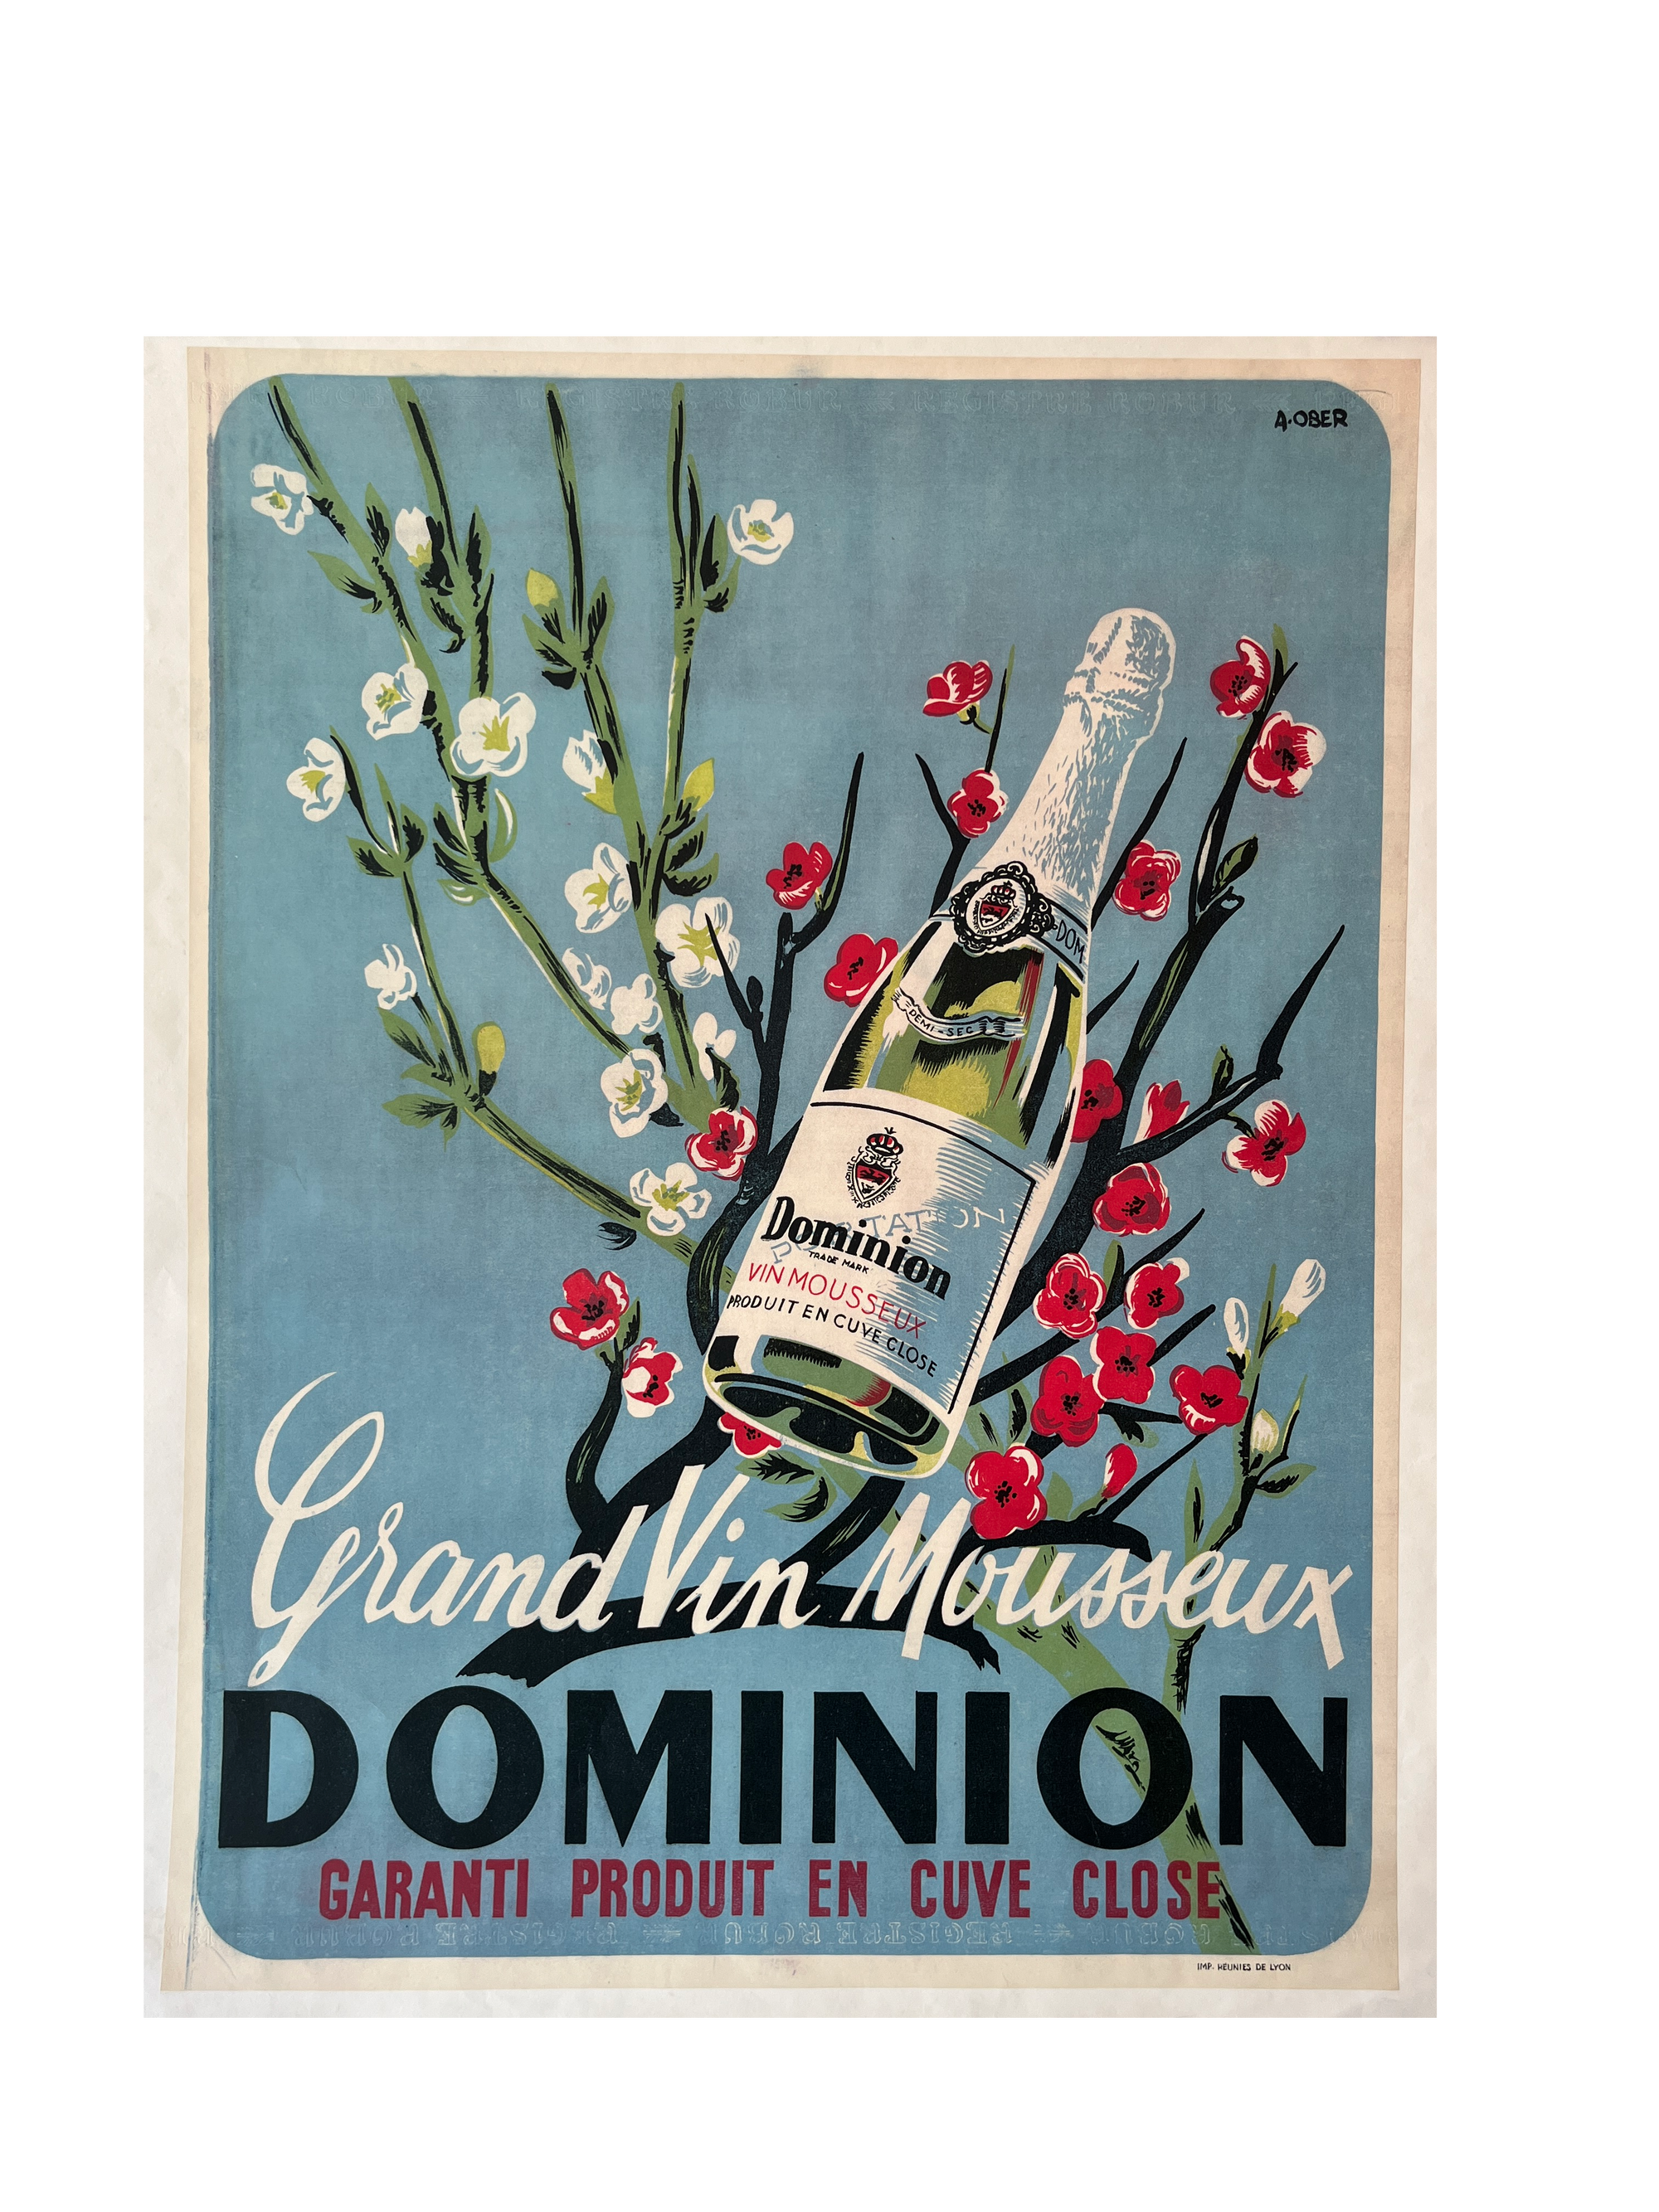 Dominion Wine by A.Ober